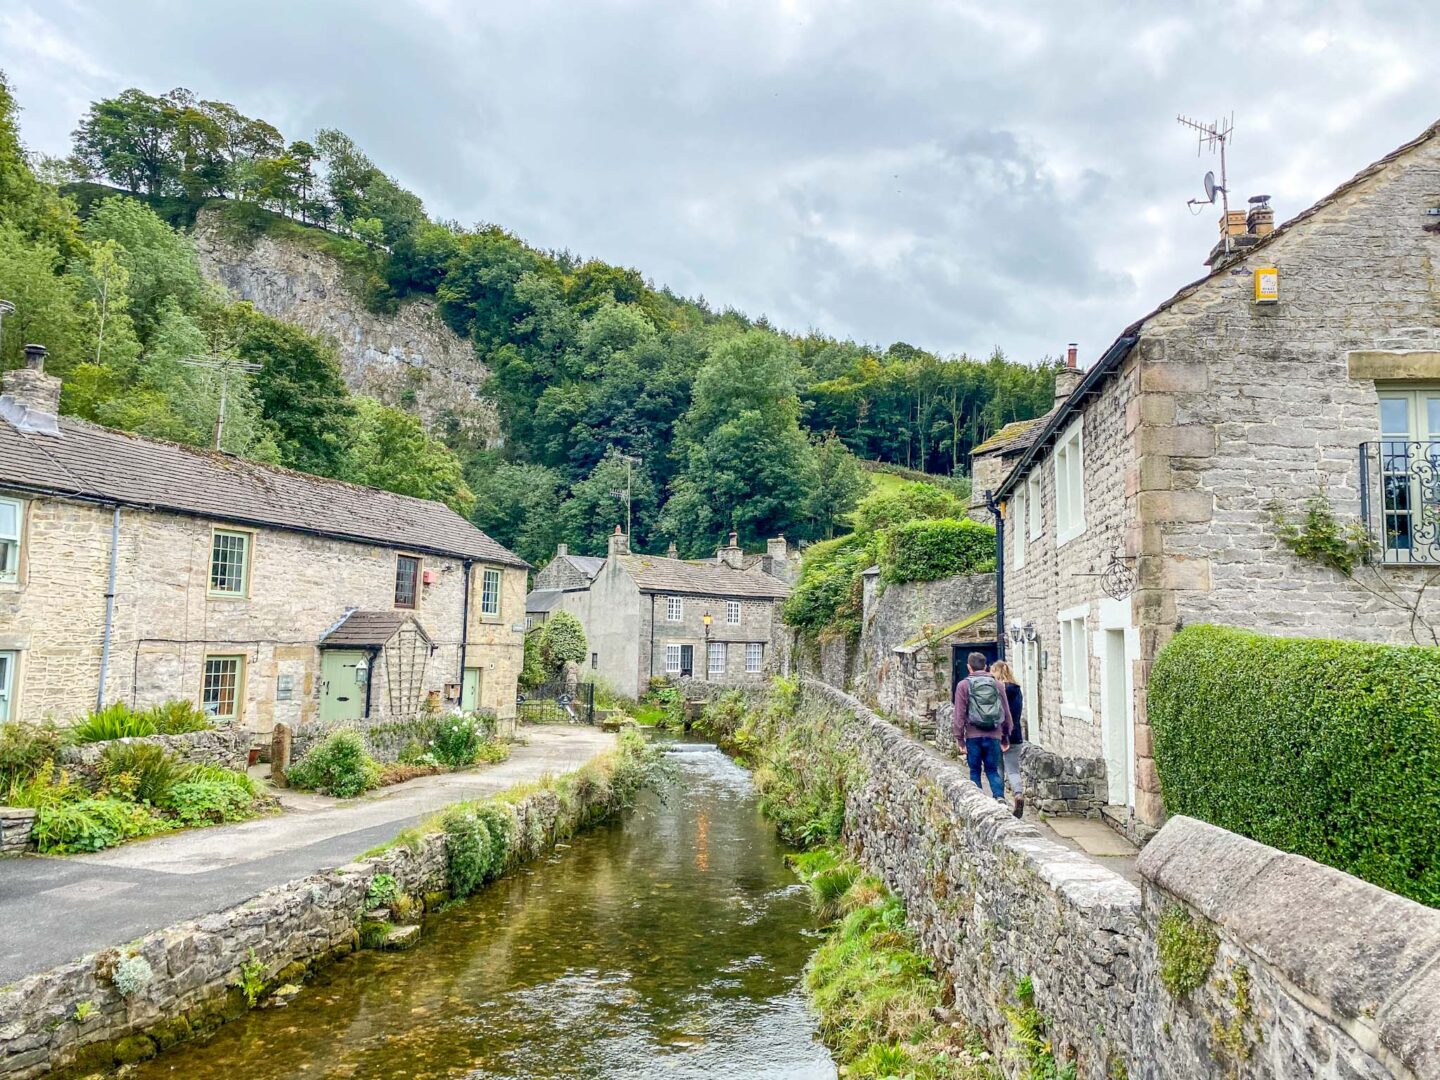 Peak District day out, Castleton village stream and houses